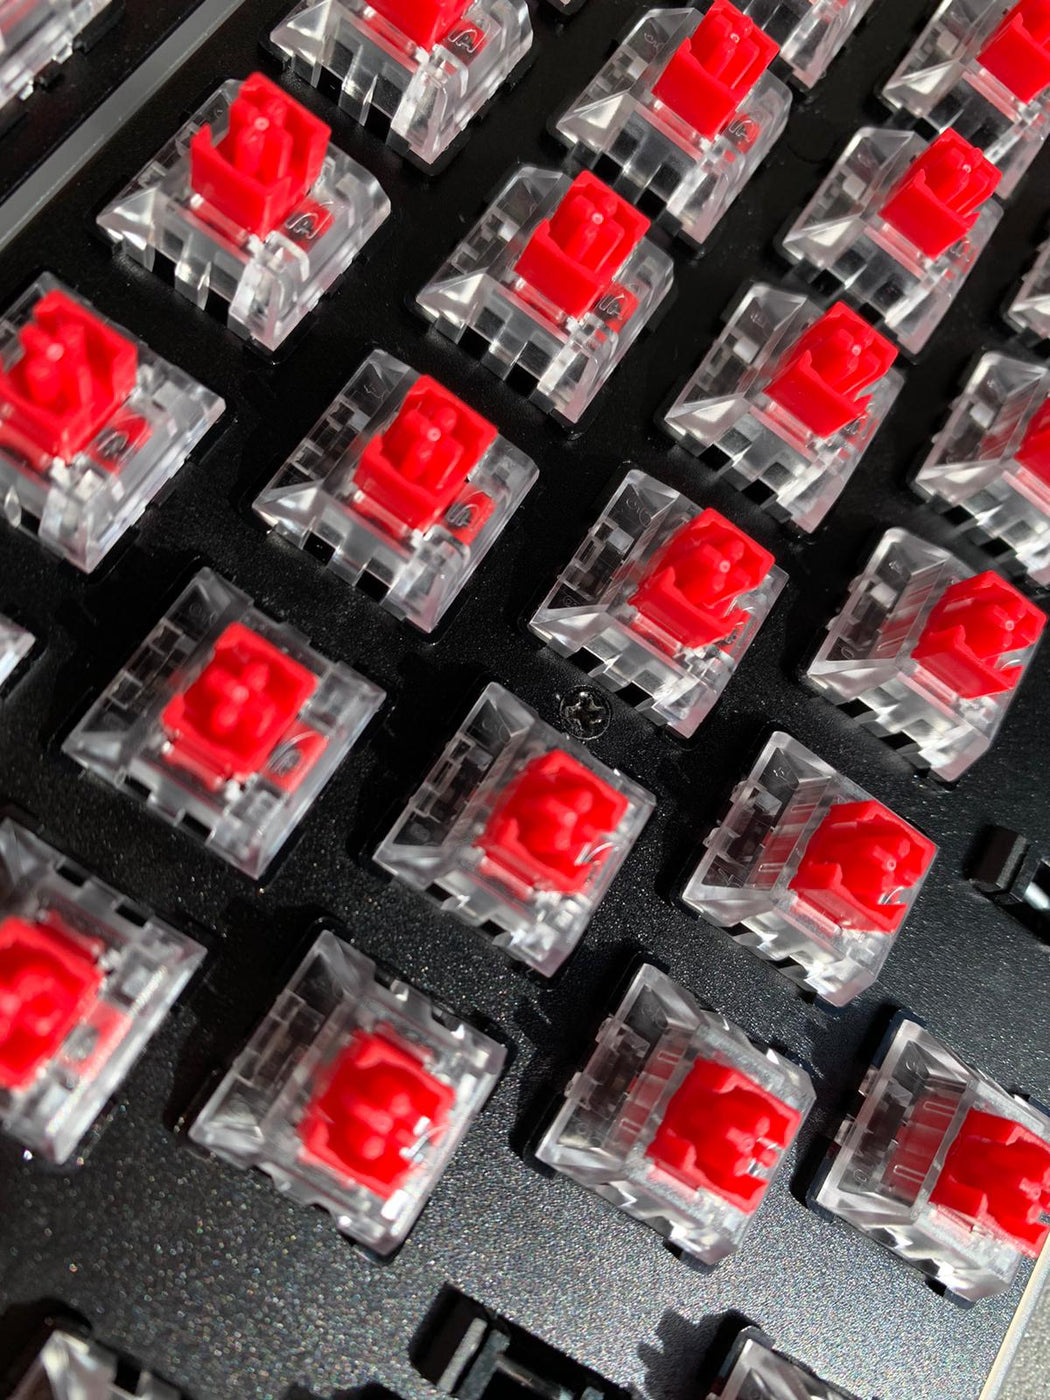 quiet clicky switches